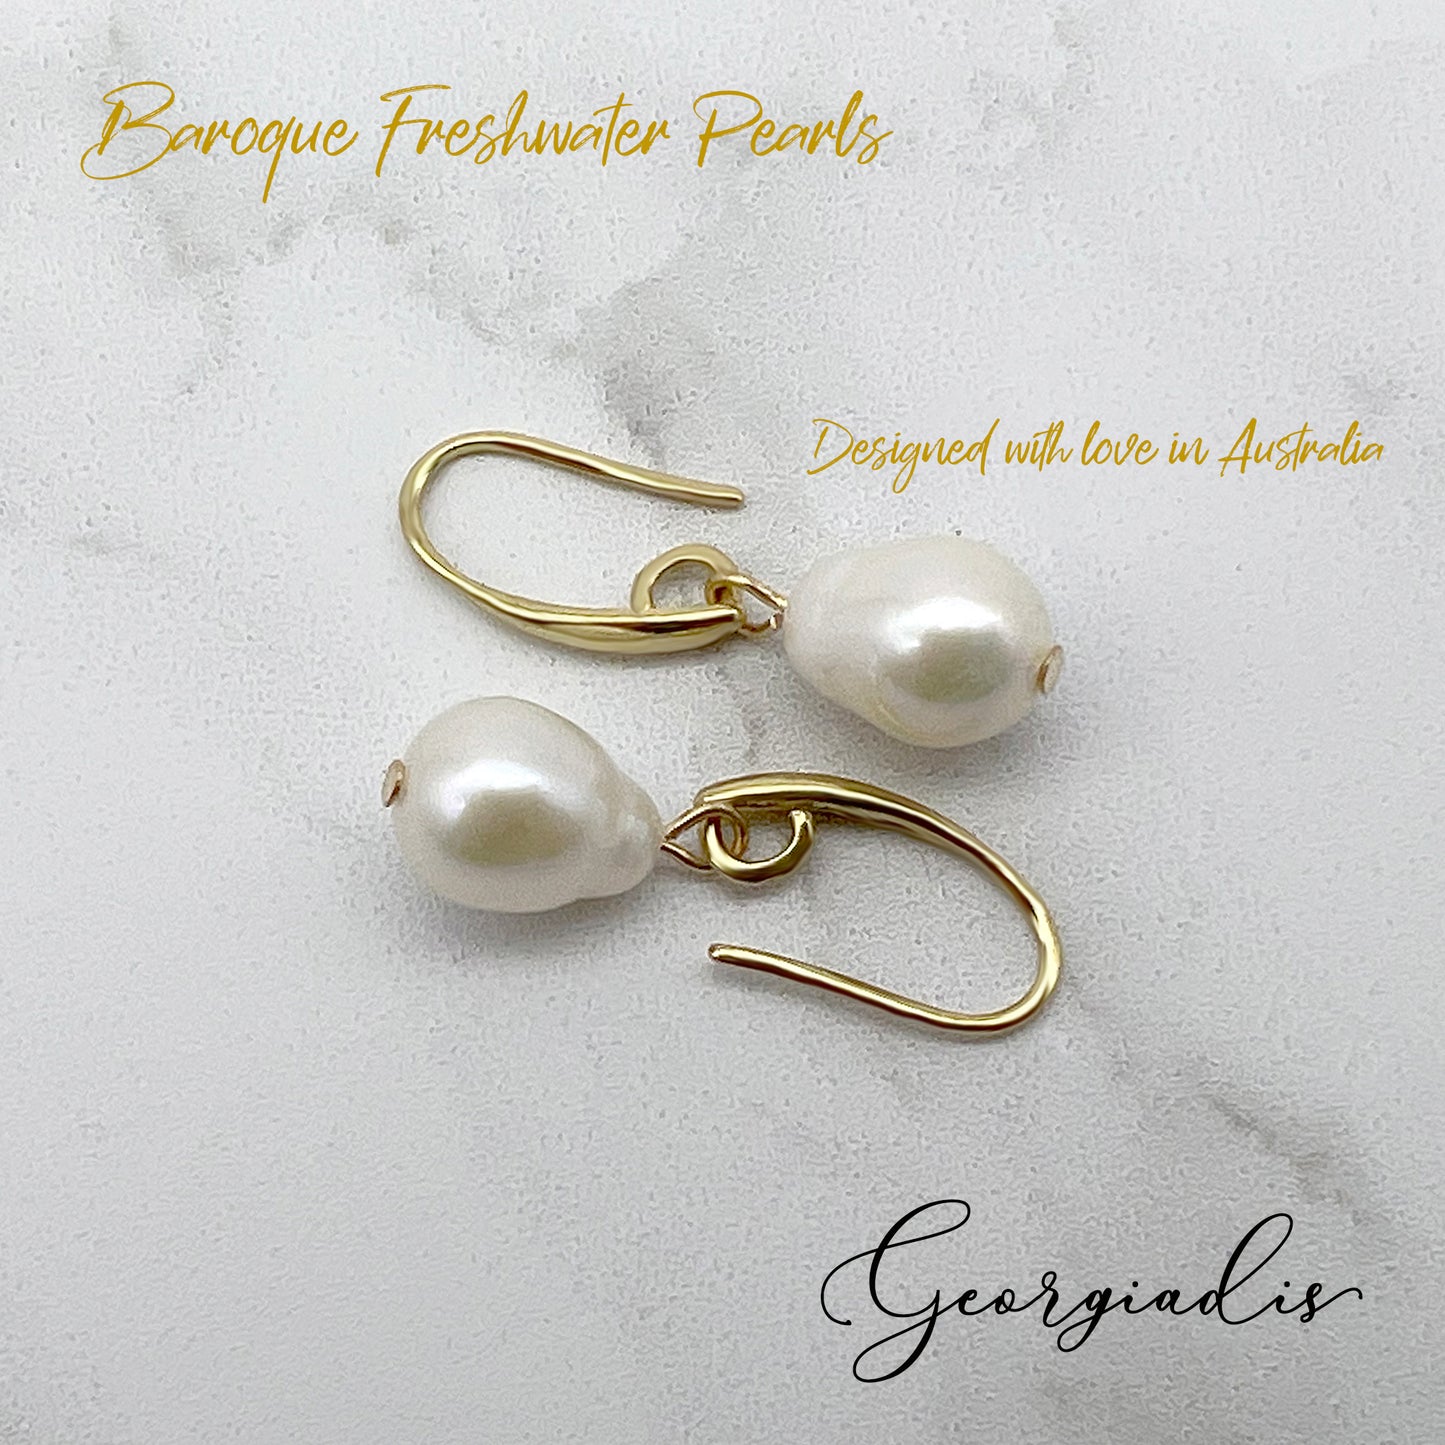 Elegant Baroque Freshwater Pearl Drop Earrings, Grade A High Lustre White Pearls. Symbol of Beauty, Wealth, Prosperity and Intuition, Gift Box.